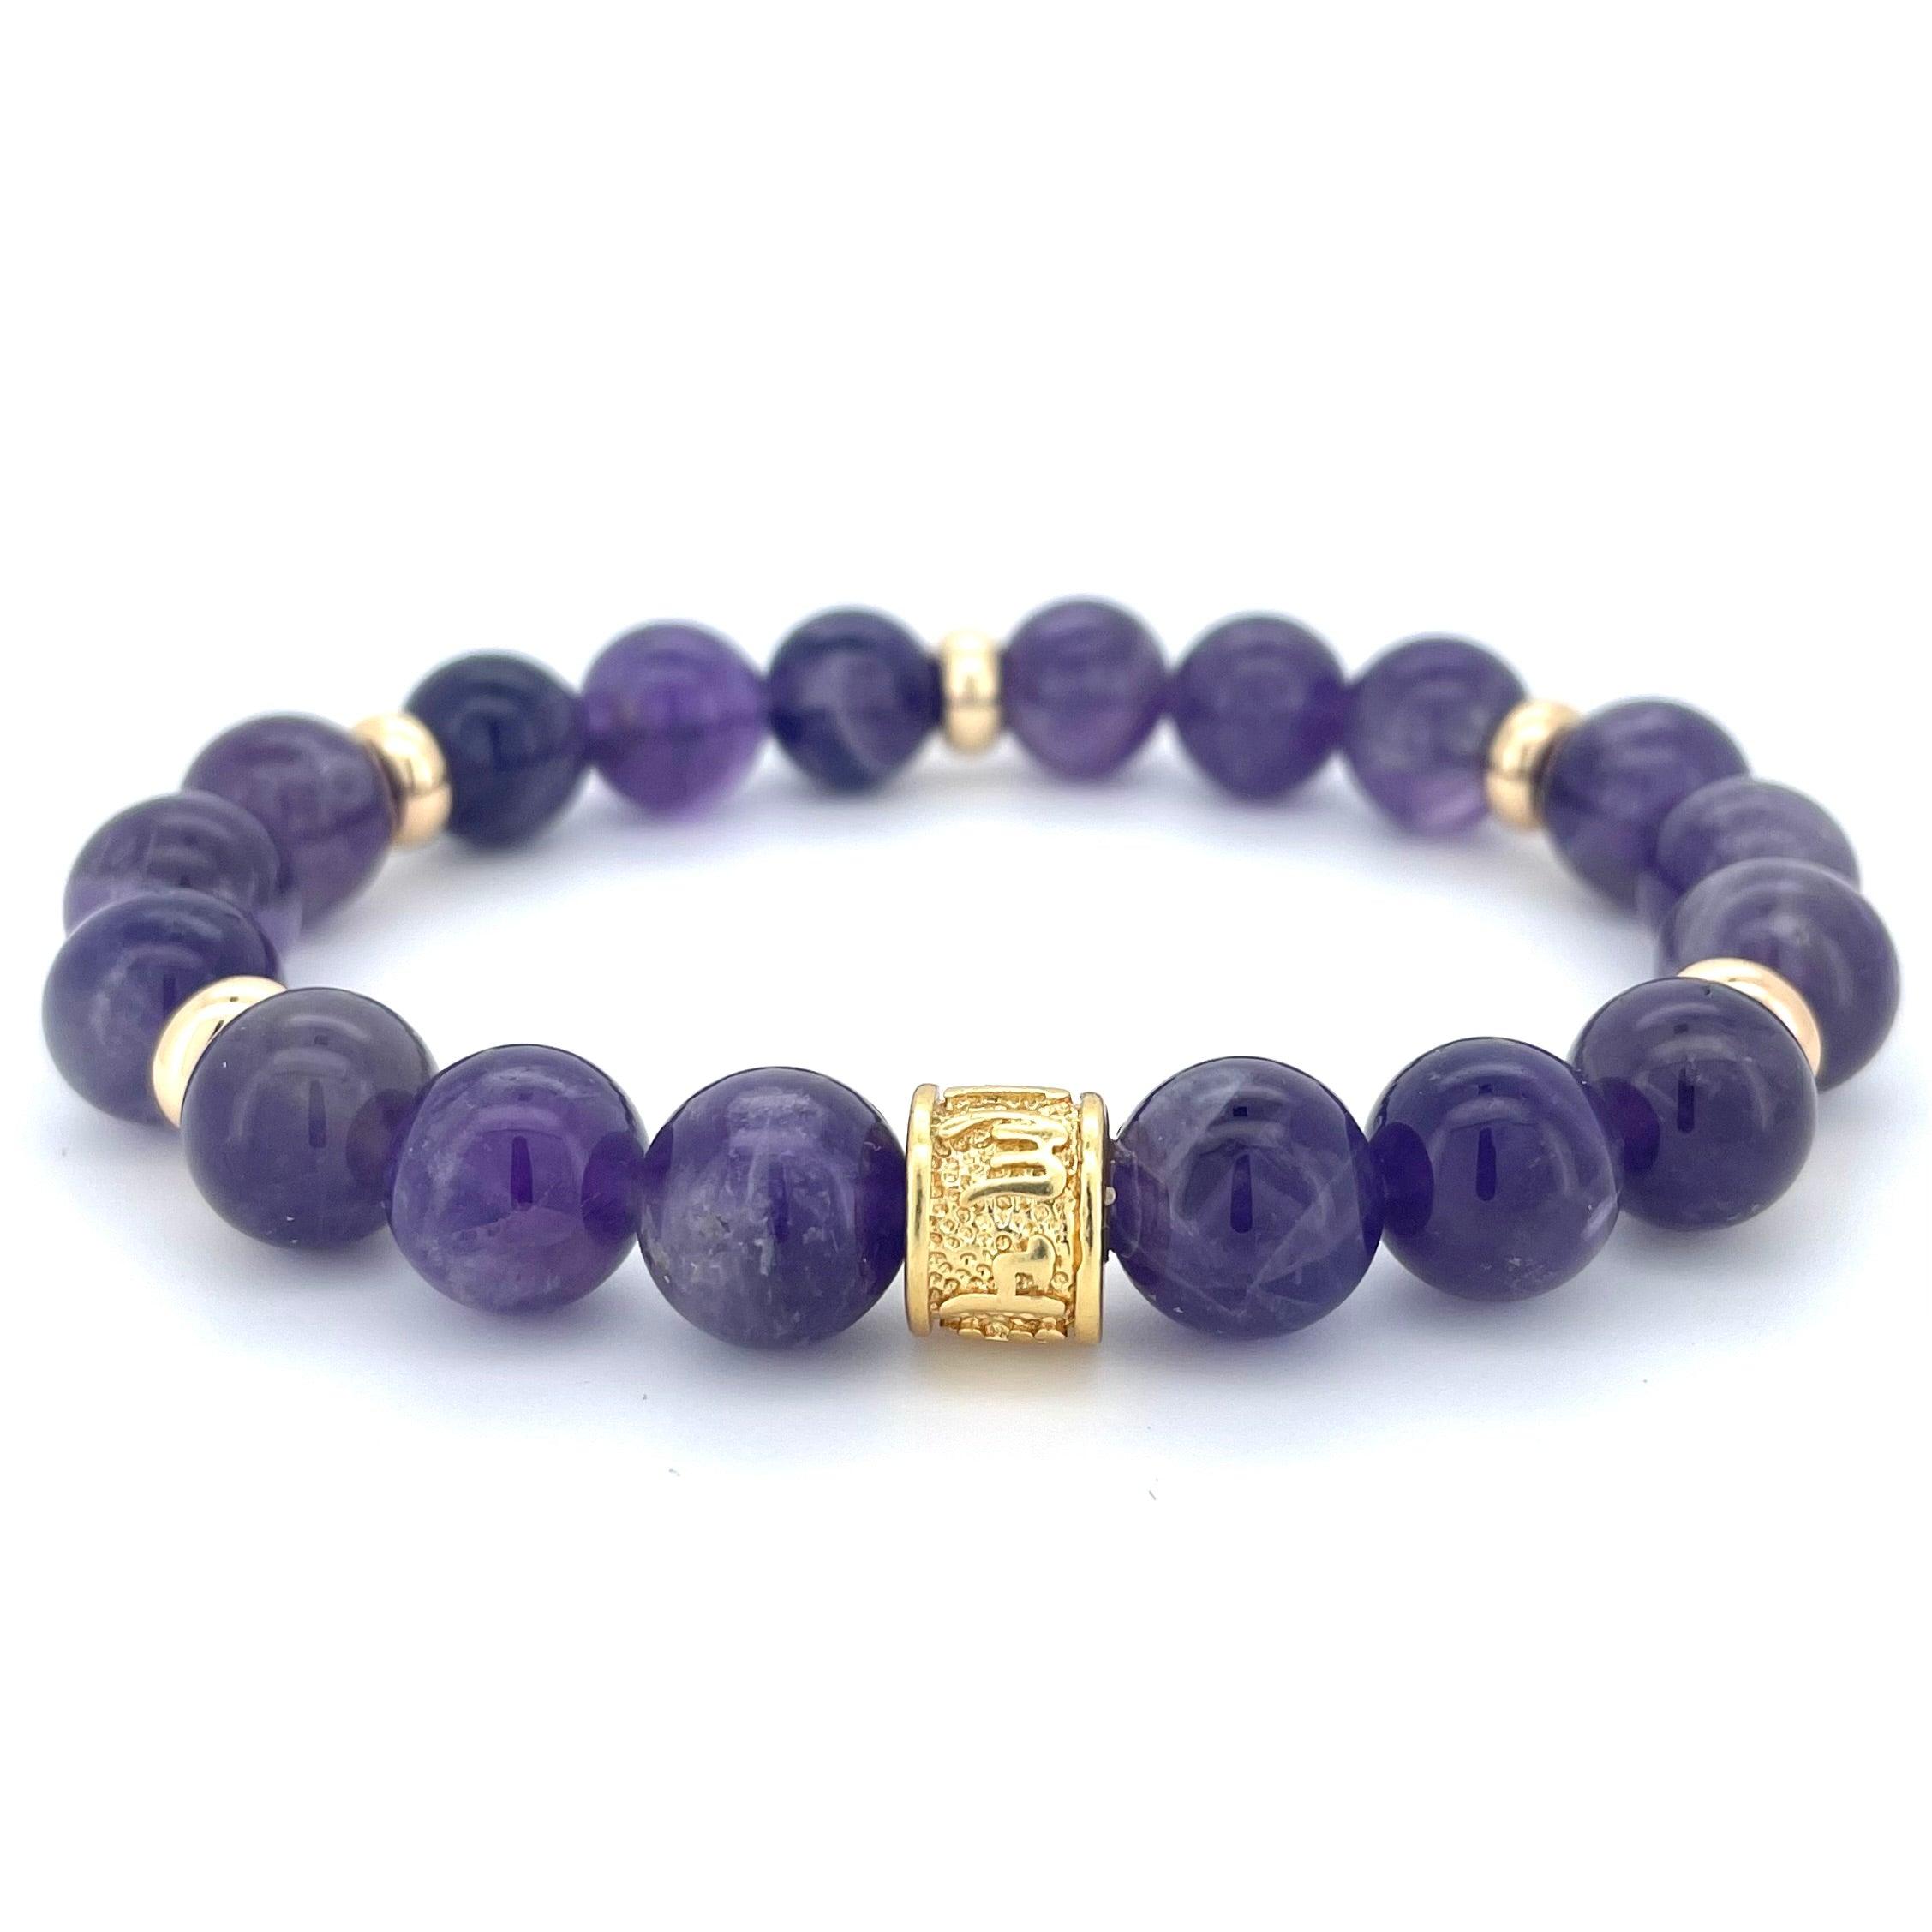 AMETHYST & GOLD BEADED BRACELET - HALCYON COLLECTION - Headless Nation